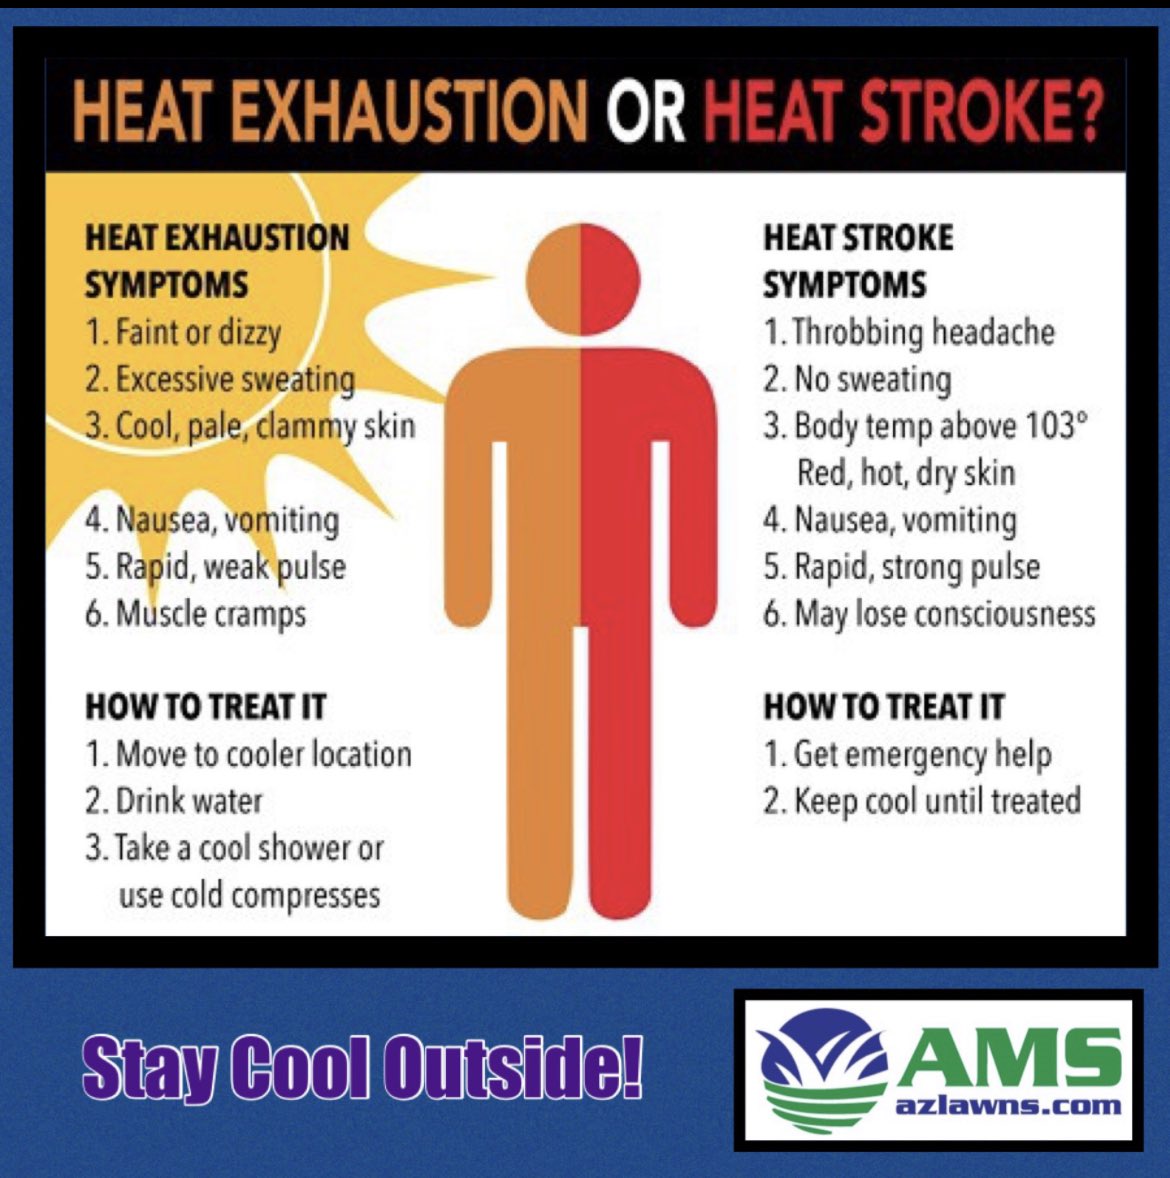 Stay cool outside!  Here are symptoms of heat stroke or heat exhaustion and how to treat it.

#heatstroke #heatexhaustion #phoenixsummers #symptoms #treatment #amslandscaping #azlawns